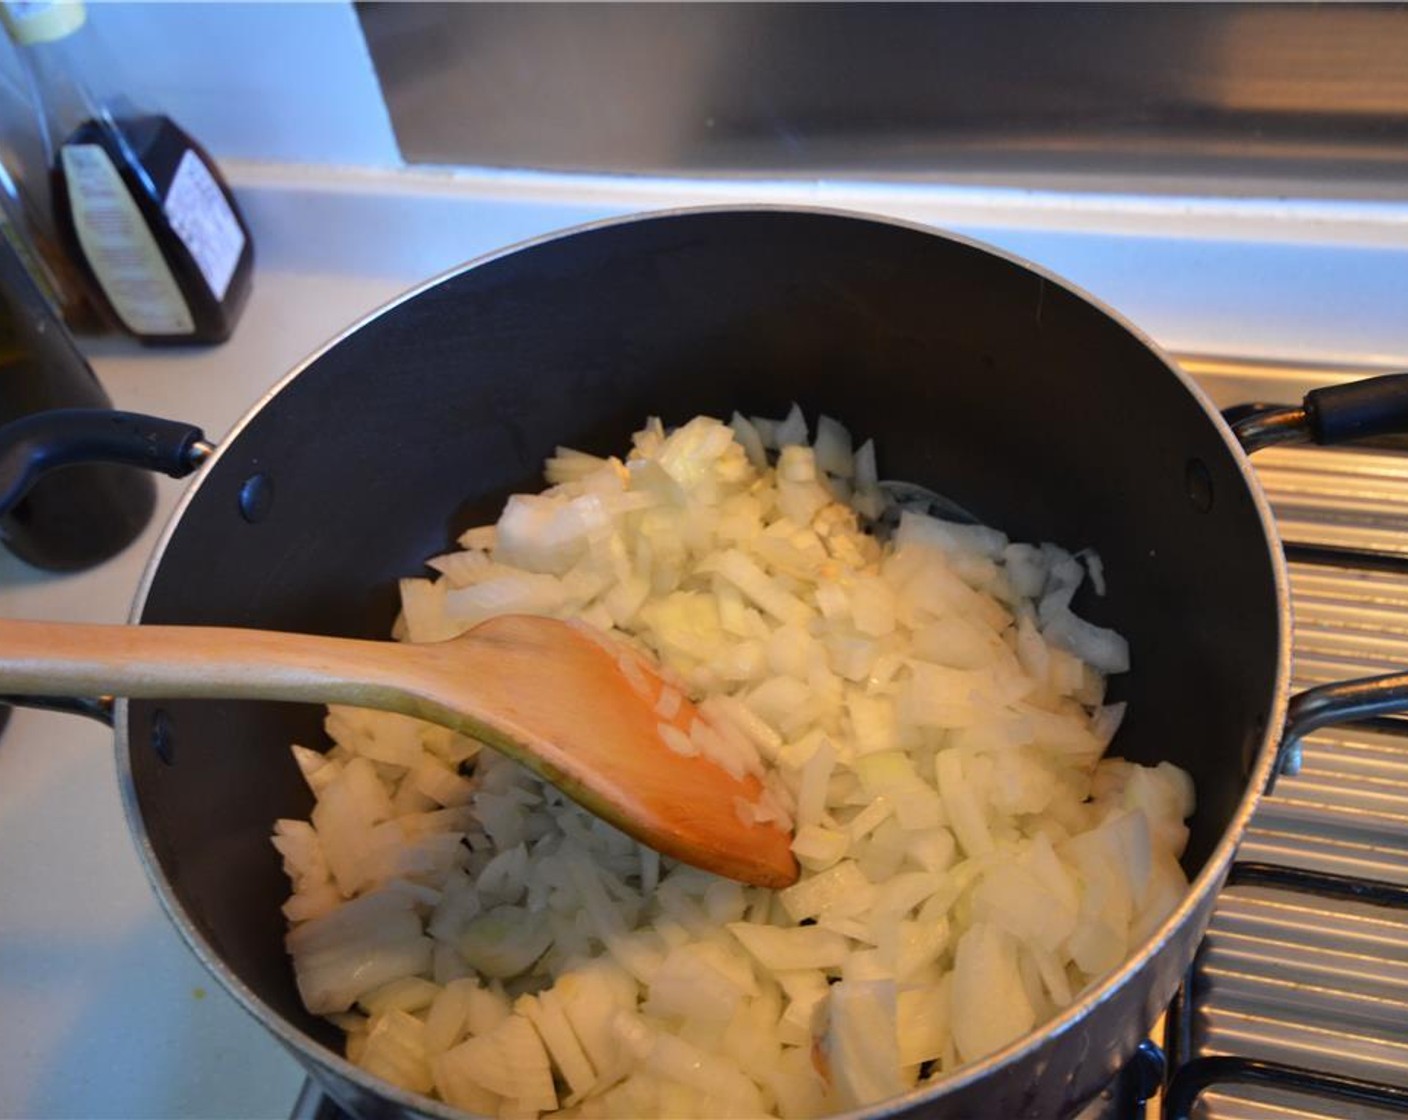 step 4 In a large pot, saute the onions and garlic clove for 3 minutes until soft.